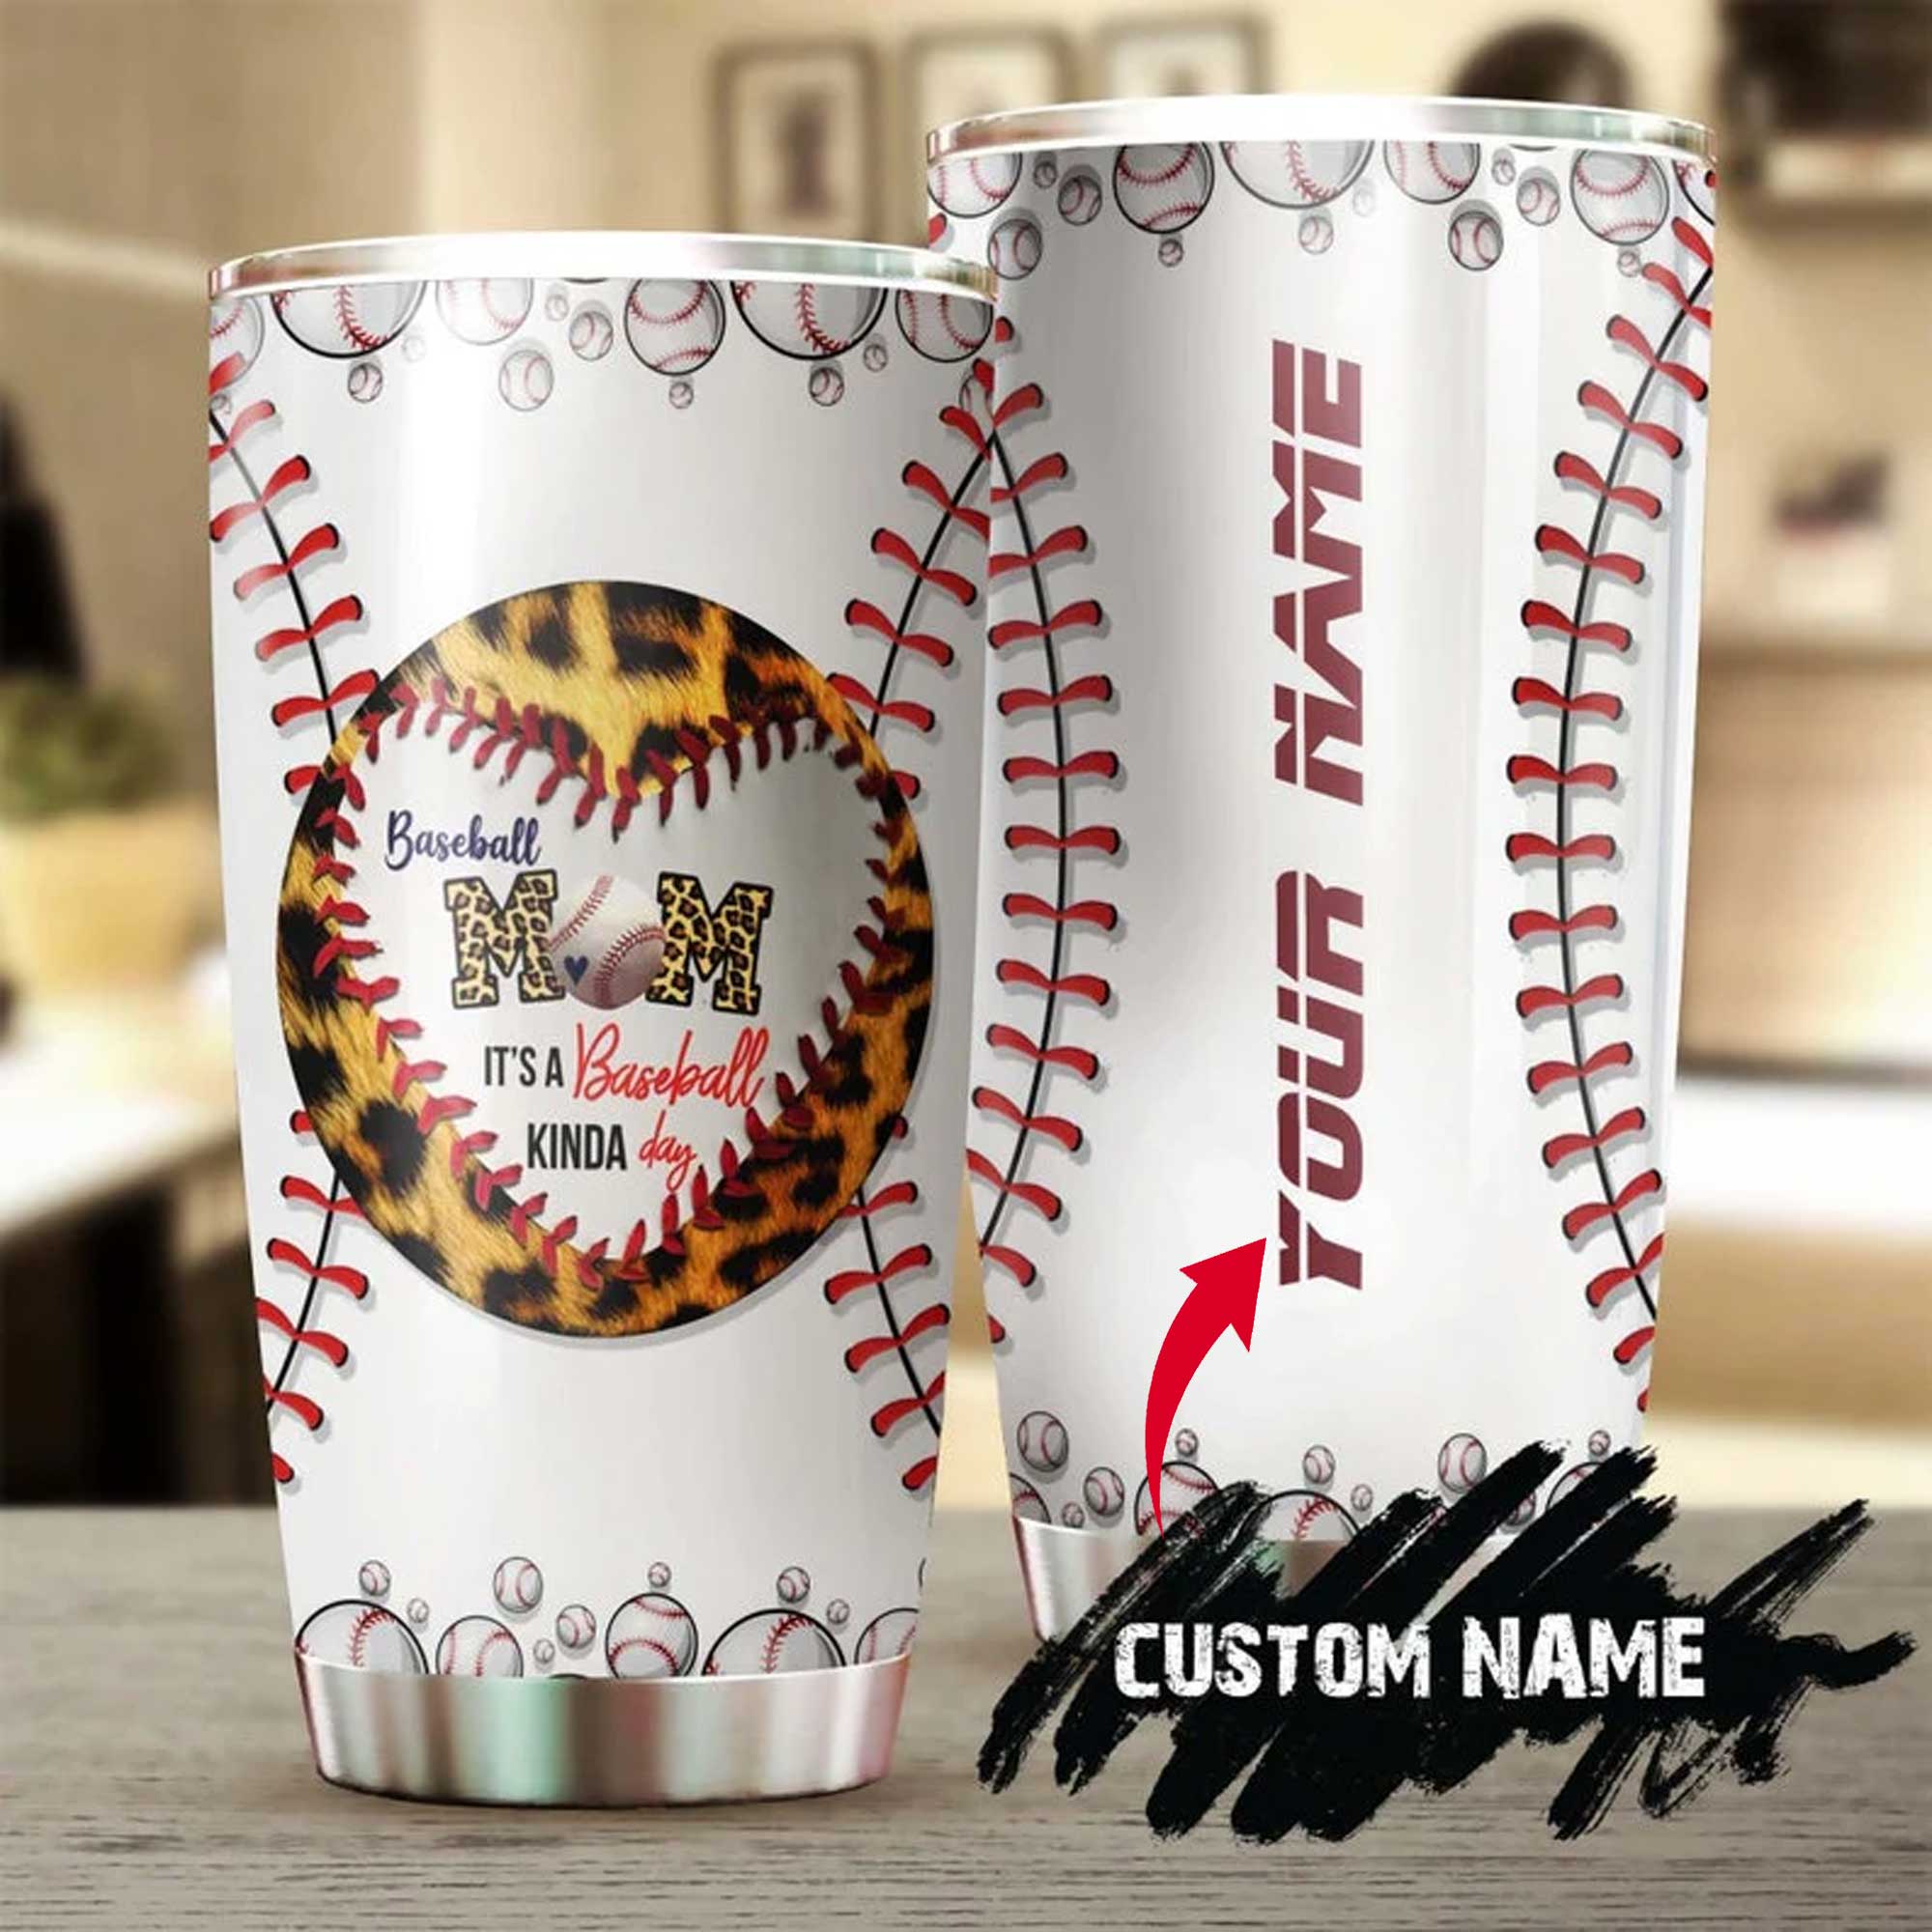 Personalized Mother's Day Gift Tumbler - Custom Gift For Mother's Day, Presents for Mom - Baseball Mom It's A Baseball Kinda Day Tumbler